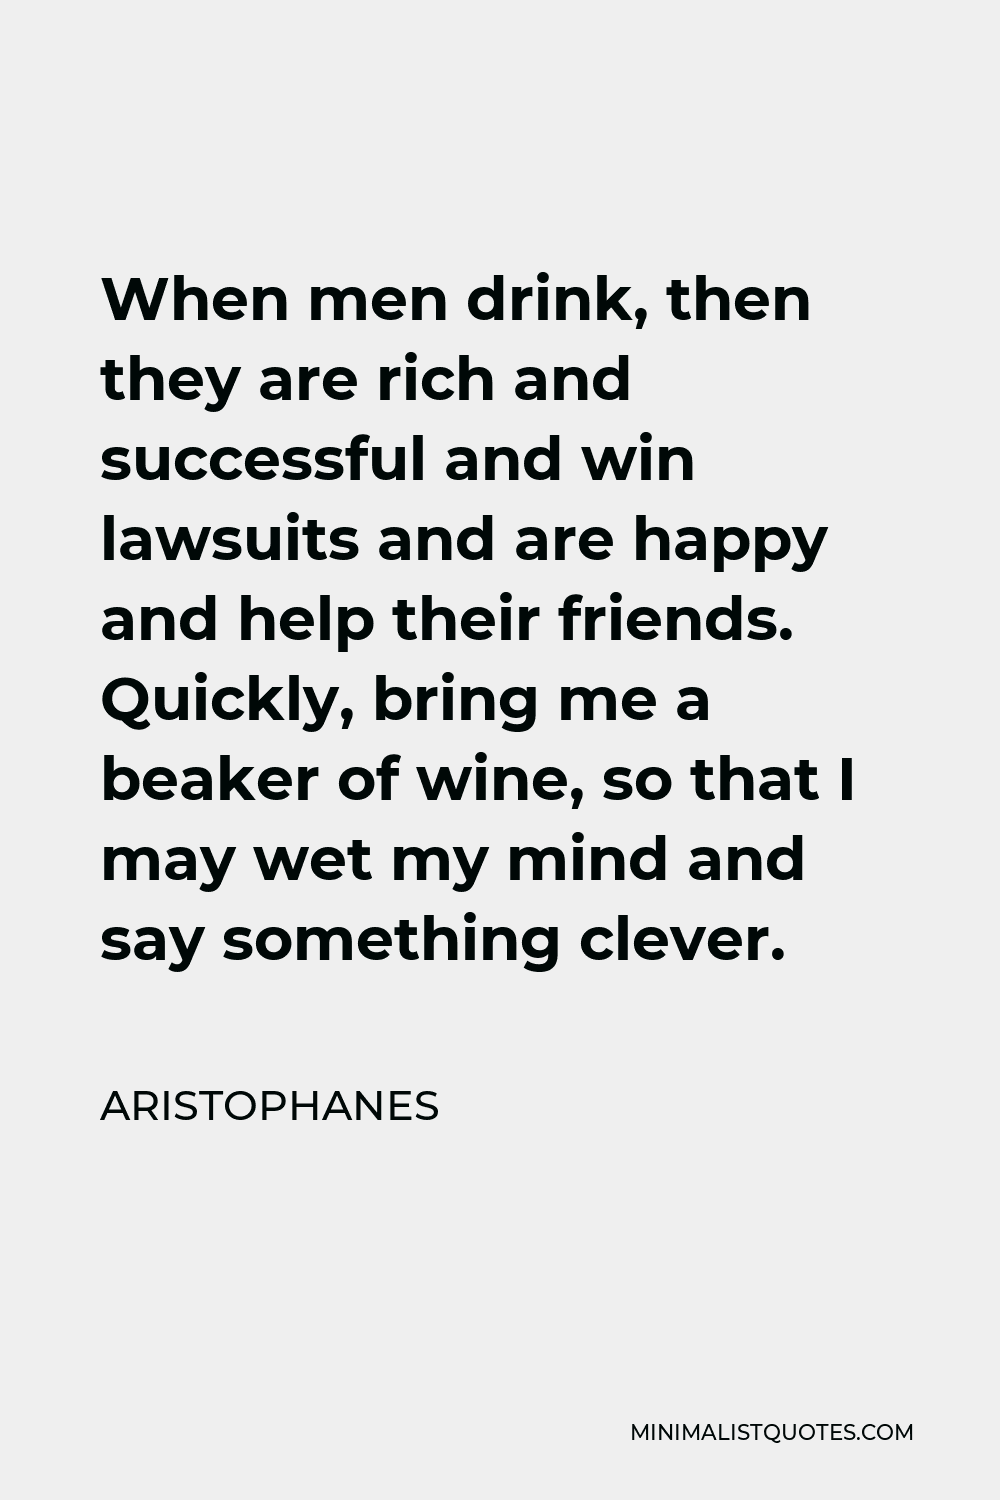 Aristophanes Quote - When men drink, then they are rich and successful and win lawsuits and are happy and help their friends. Quickly, bring me a beaker of wine, so that I may wet my mind and say something clever.